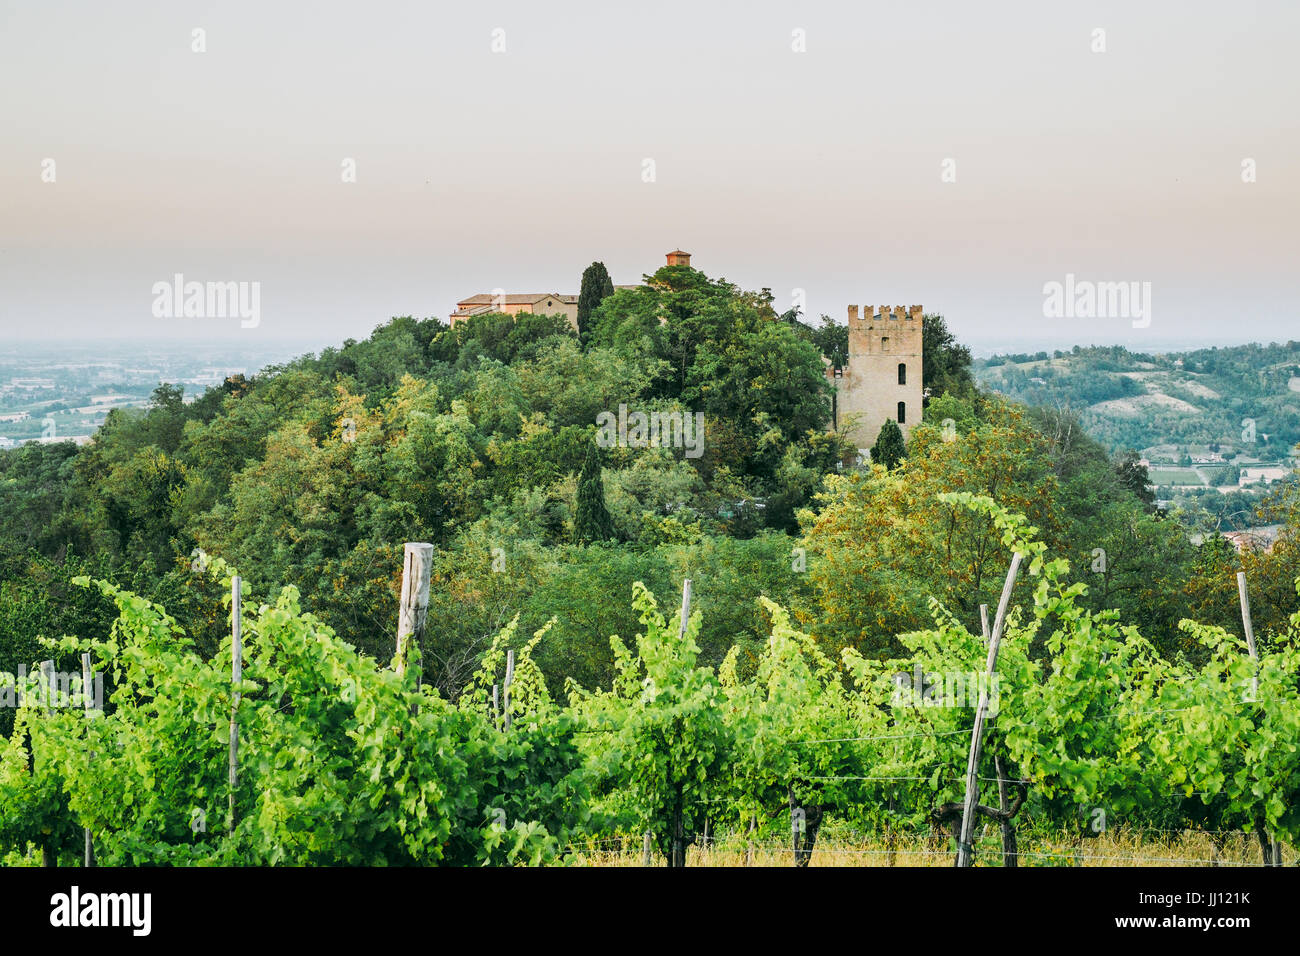 The ancient Monteveglio Abbey viewed from the vineyard in front of. Bologna province, Italy. Stock Photo